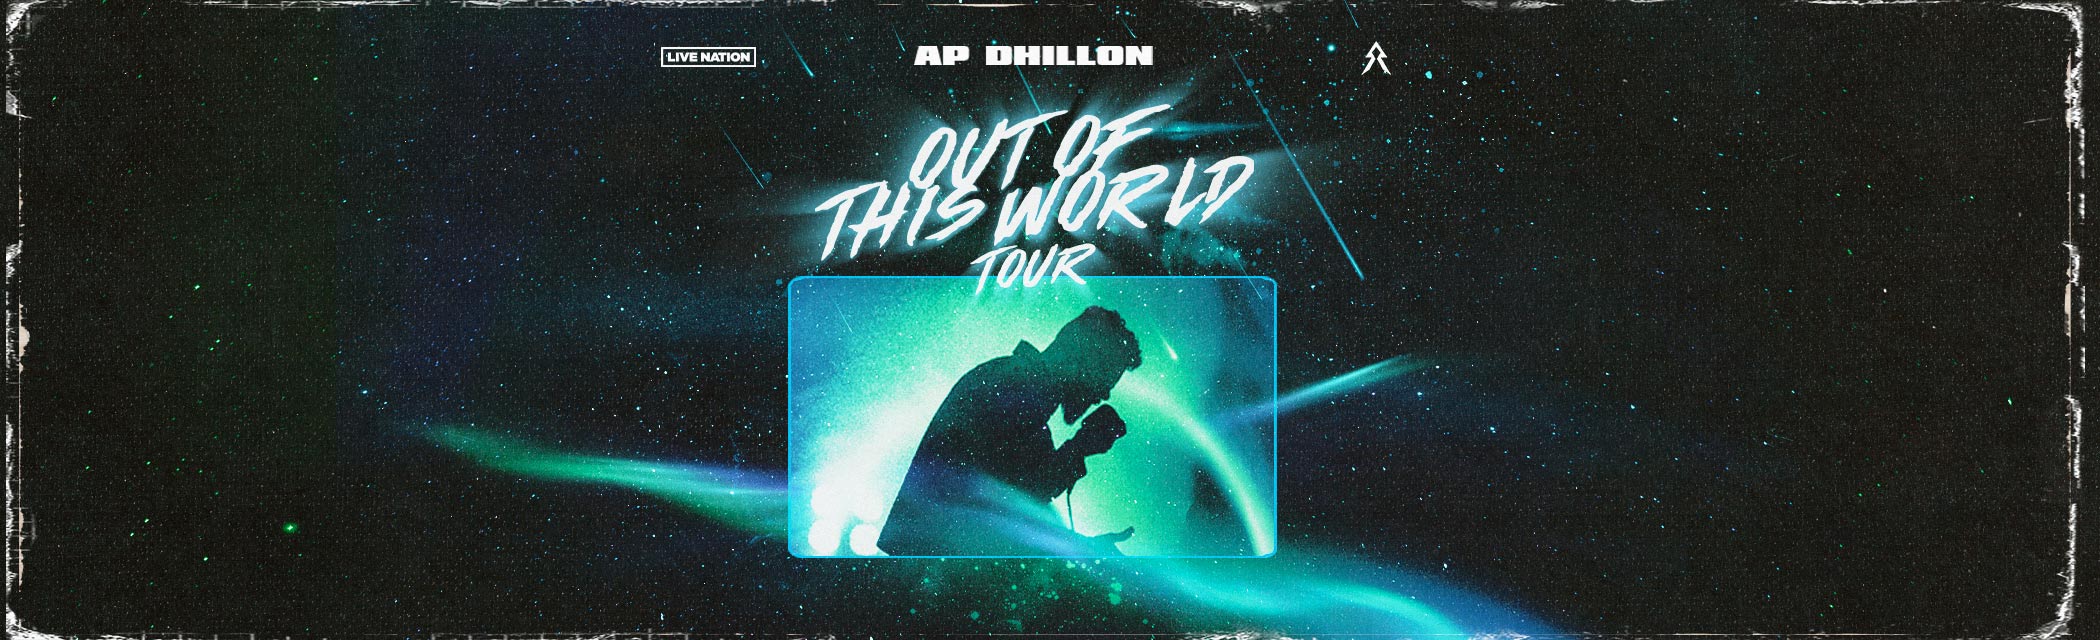 OUT OF THIS WORLD TOUR